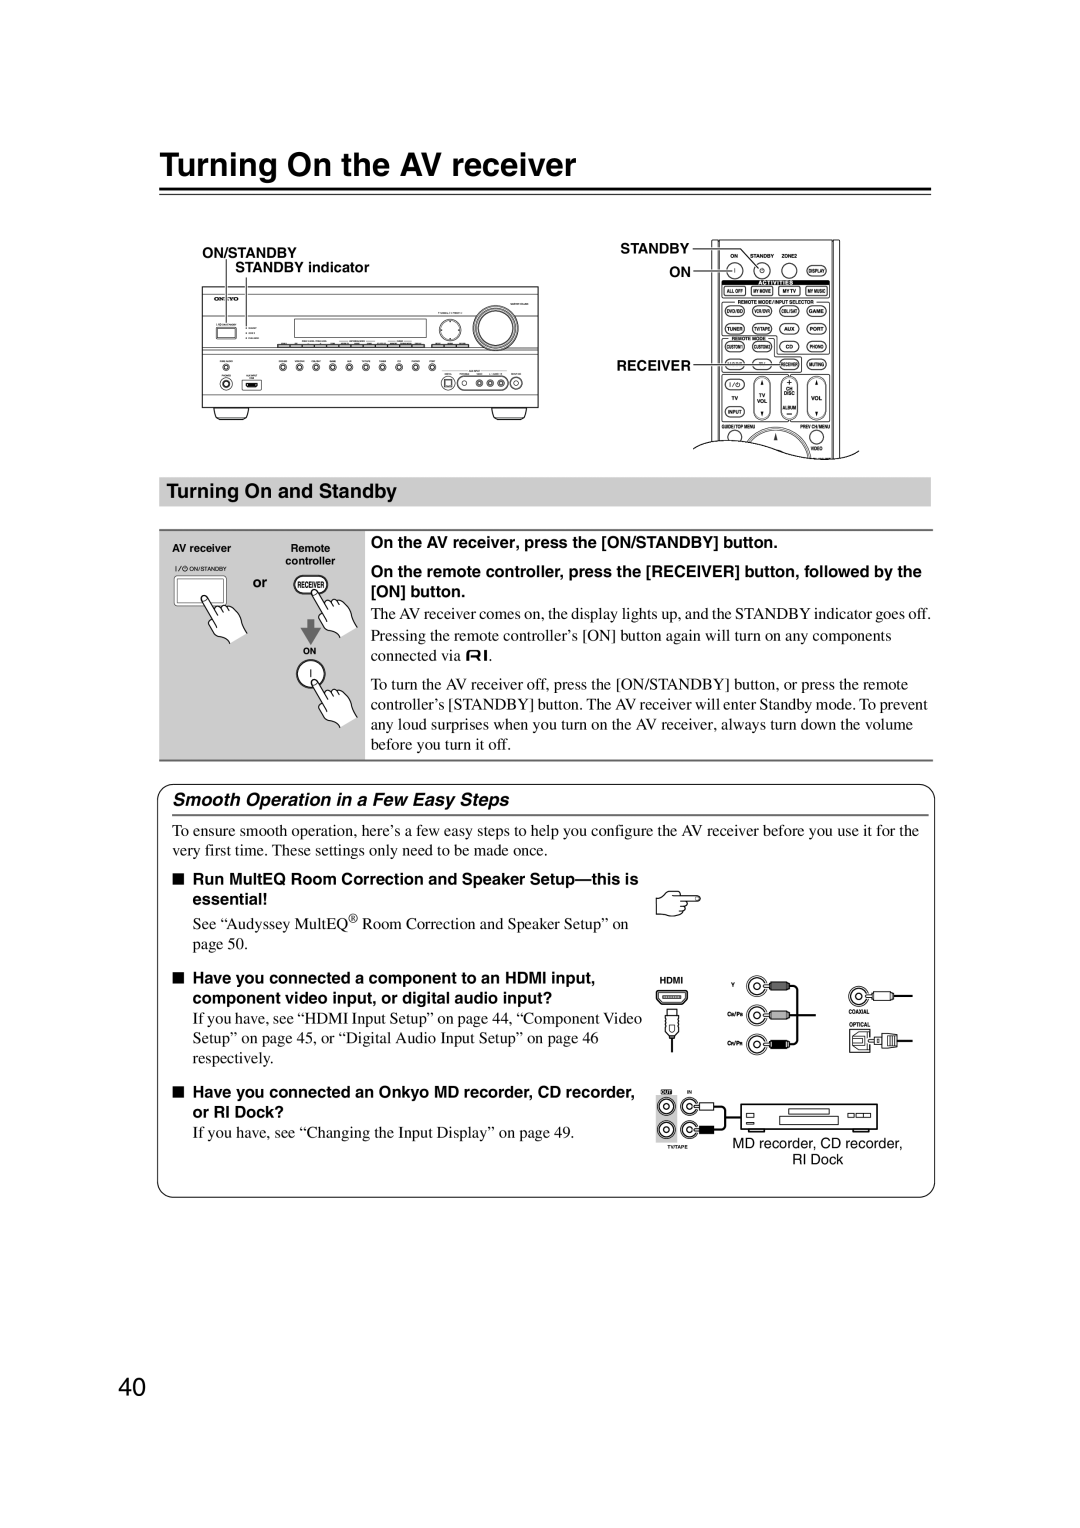 Onkyo TX-SR707 instruction manual Turning On the AV receiver, Turning On and Standby, Smooth Operation in a Few Easy Steps 